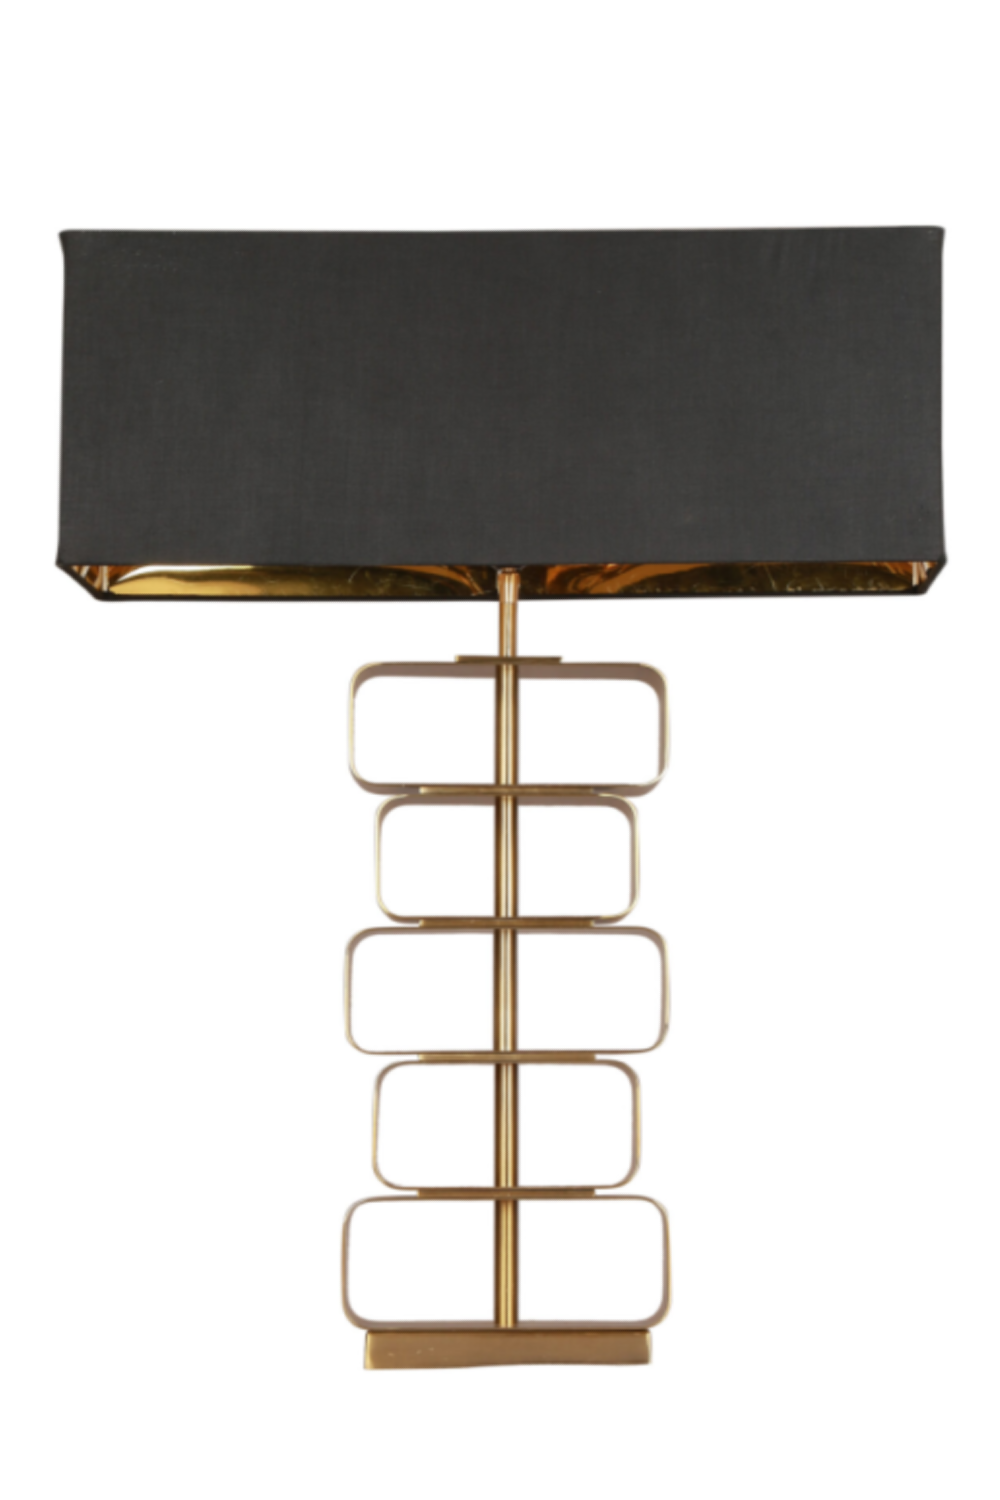 Brushed Brass Table Lamp | Liang & Eimil Trento | OROA.com